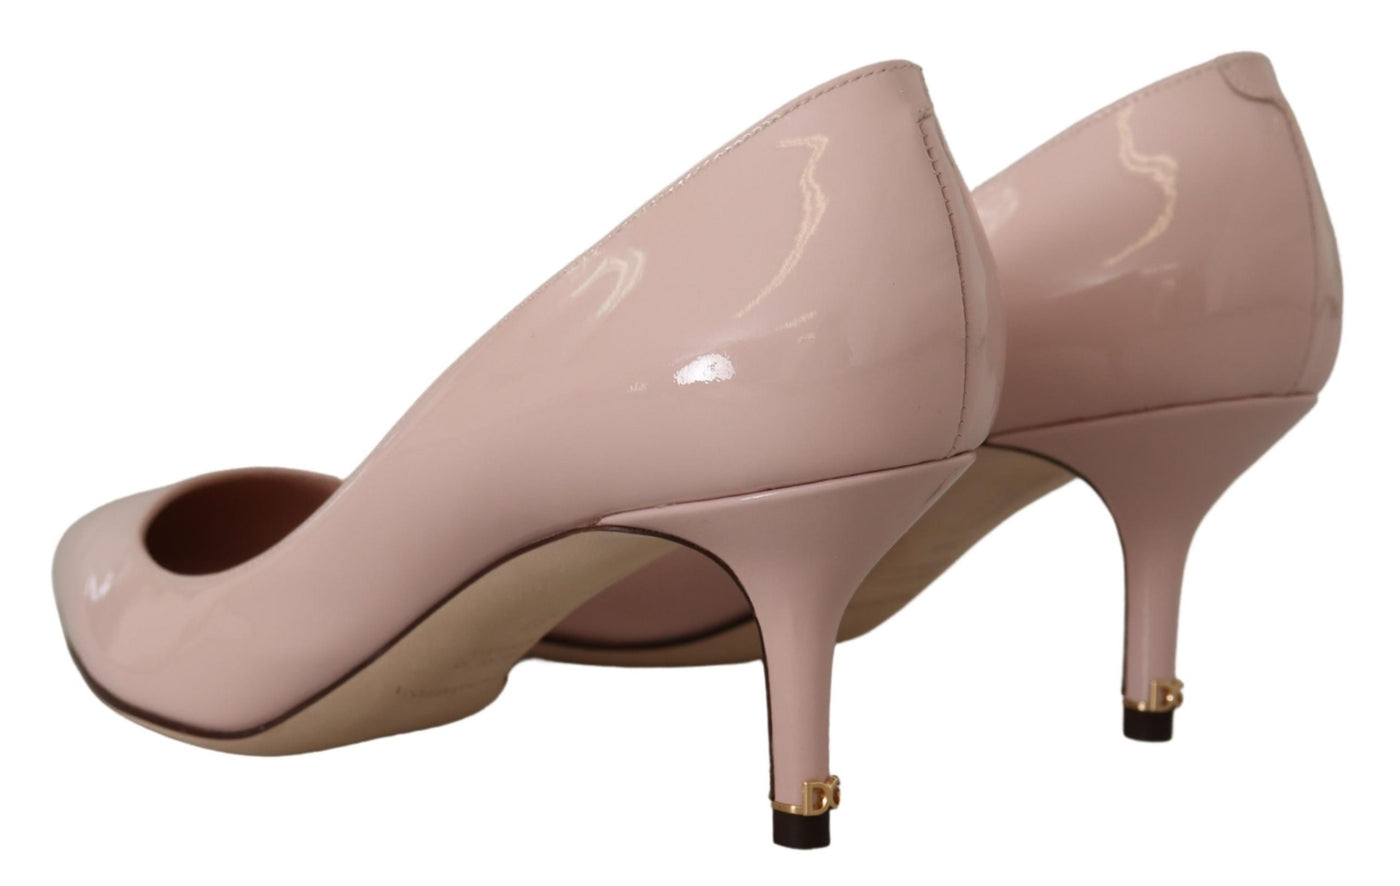 Dolce & Gabbana Pink Patent Leather Kitten Heels Pumps Shoes